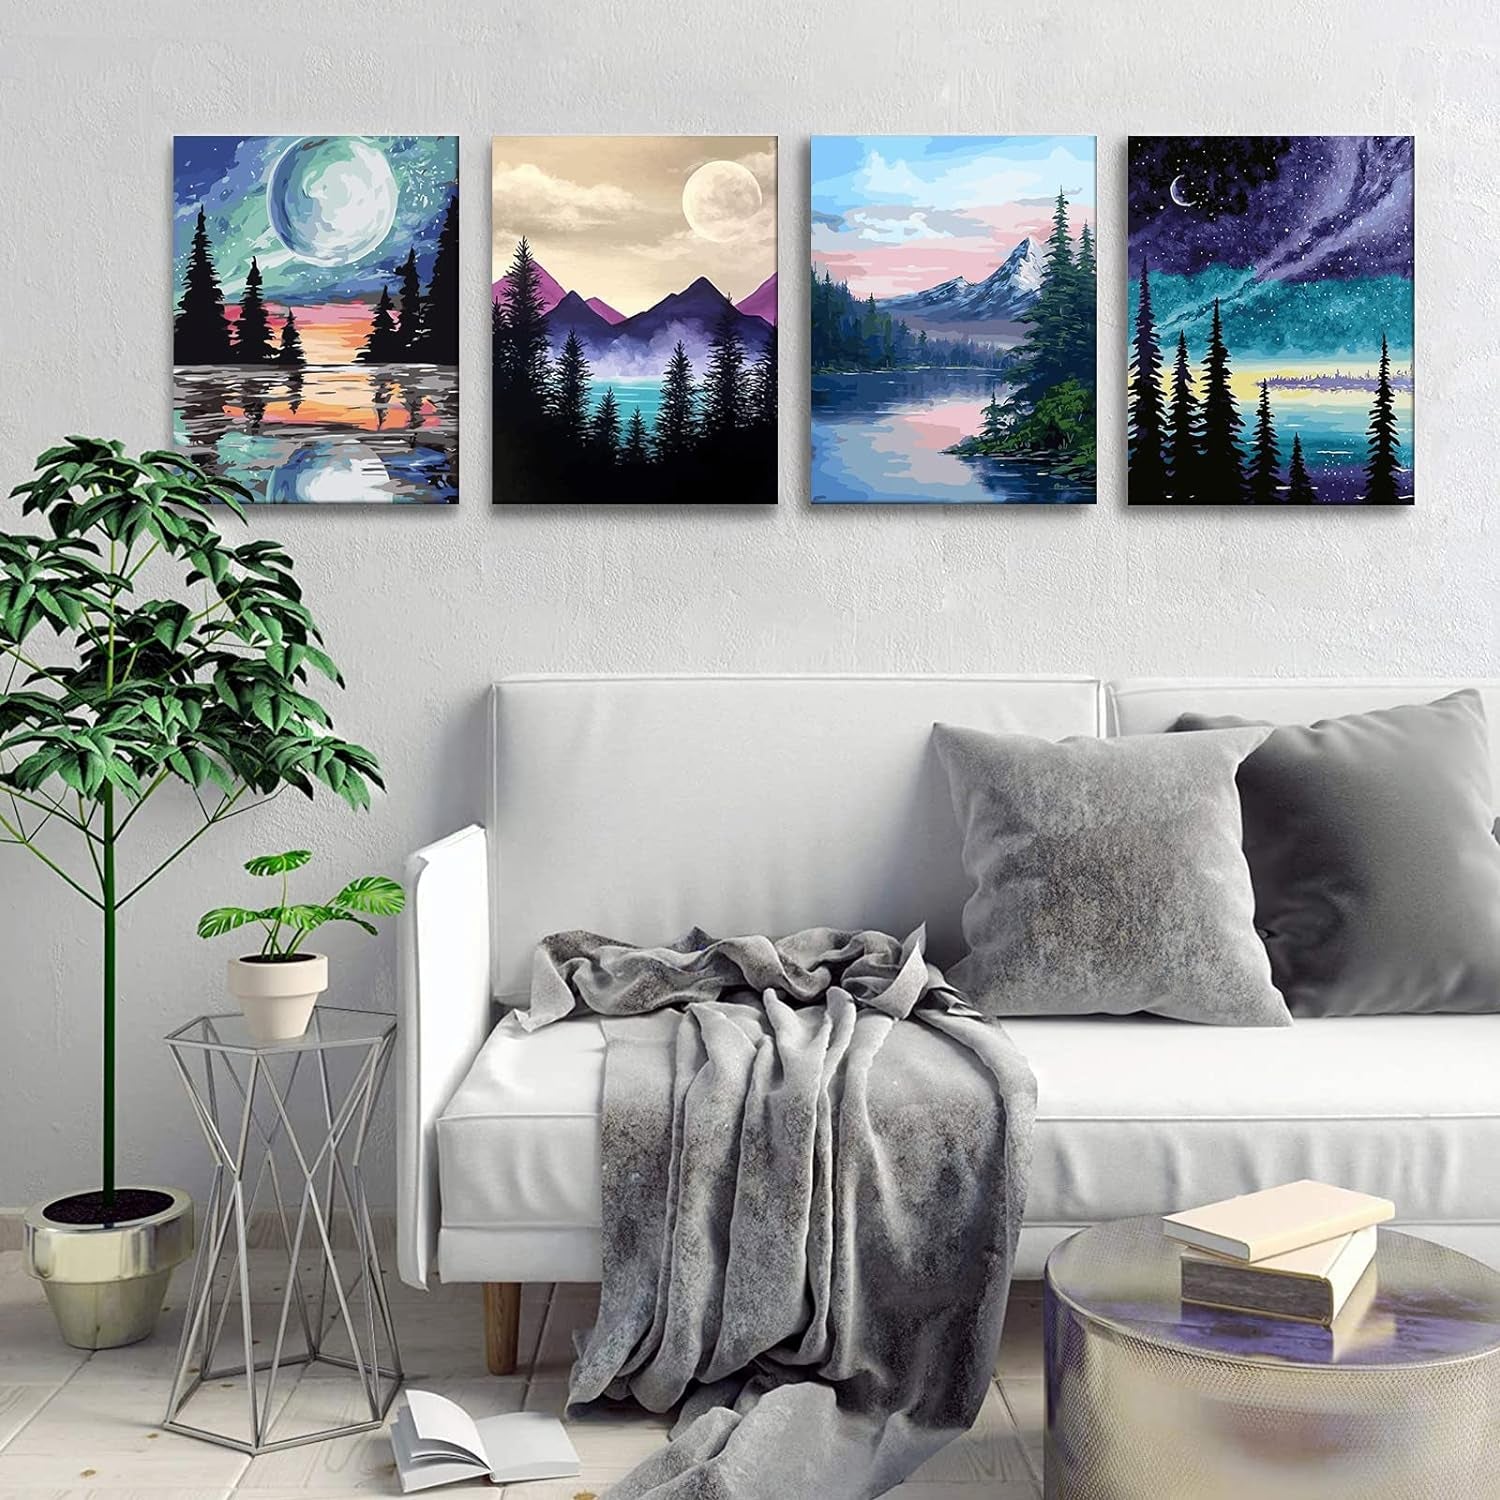 4 Pack Paint by Number for Adults Framed Canvas, DIY Arts and Crafts for Adults Beginner with Wooden Easel, Paint Brushes, Acrylic Paint Set for Home Wall Decor, 9 * 12 Inch